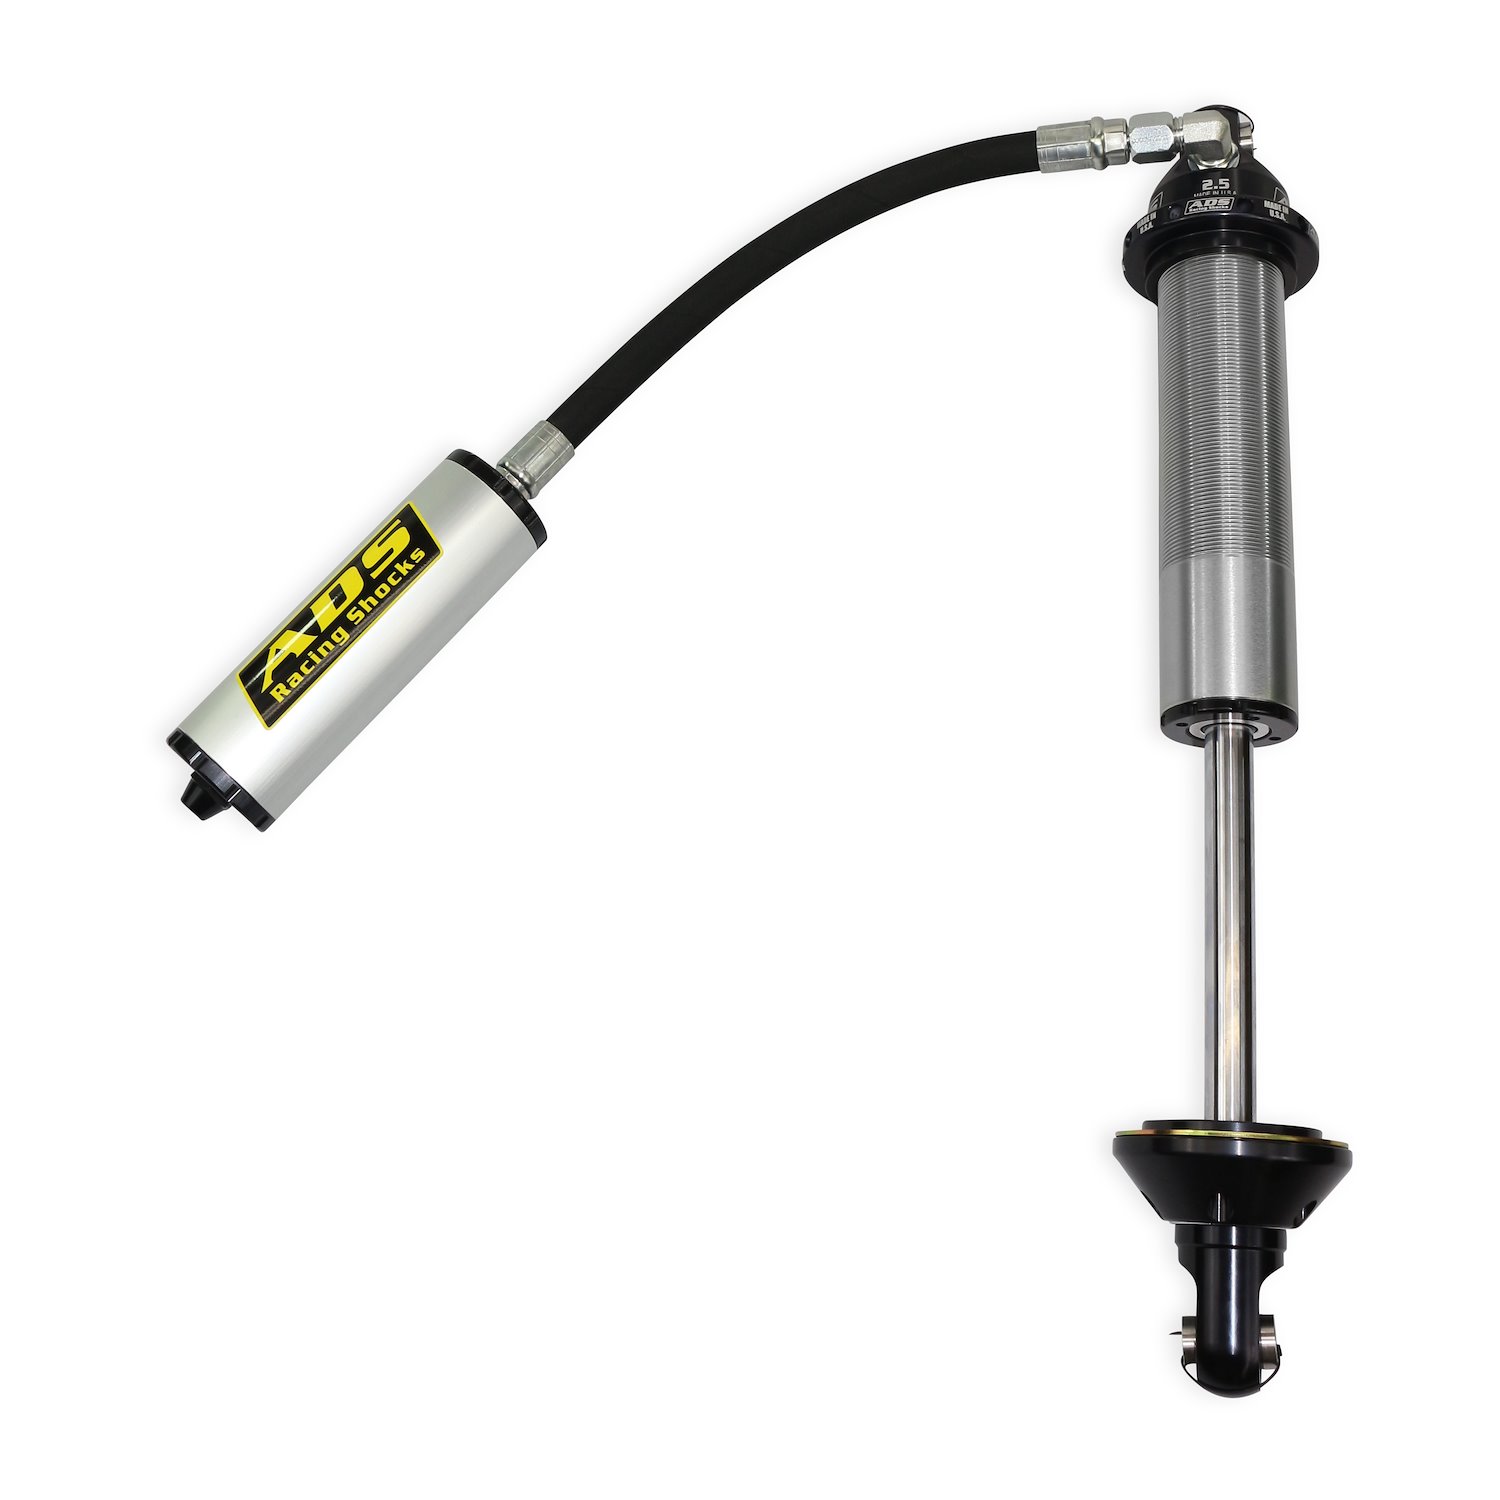 250-COS10-0A9 Coil-Over Race Shock, 2.5 in. x 10 in. Stroke, w/ Remote Reservoir (90-Degree Hose), w/ Compression Adjustment